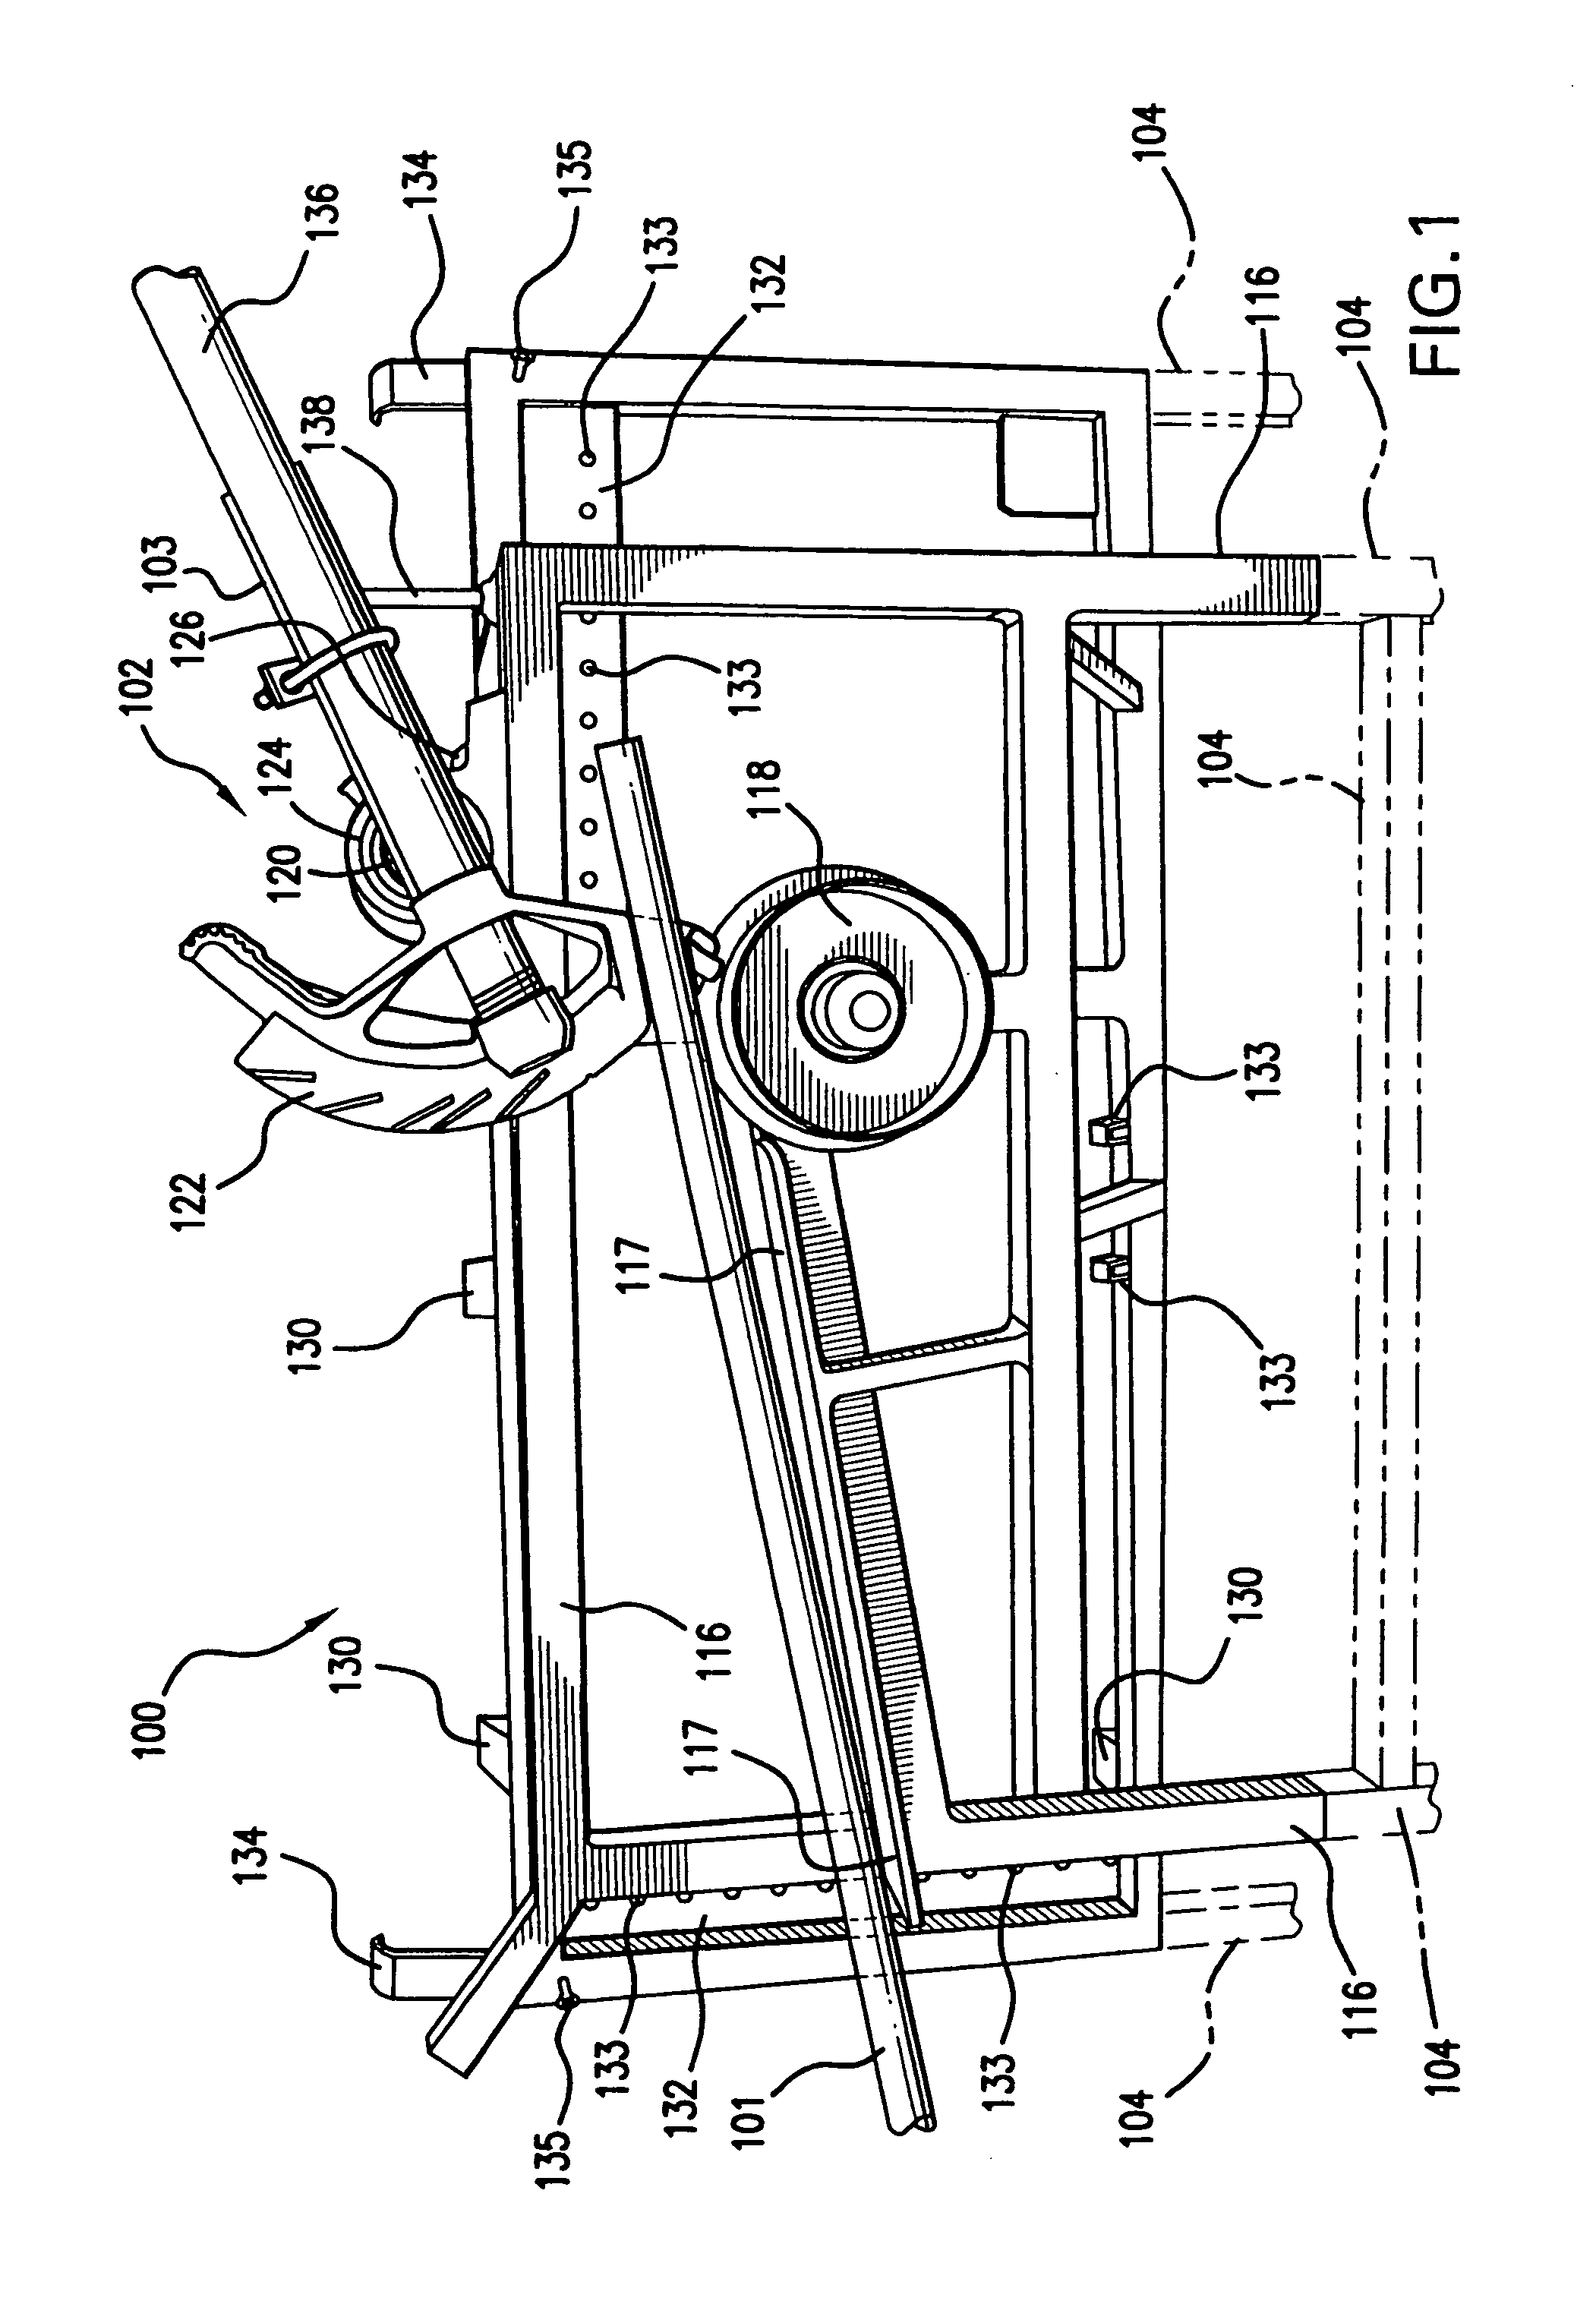 Apparatus and method for bending tubing